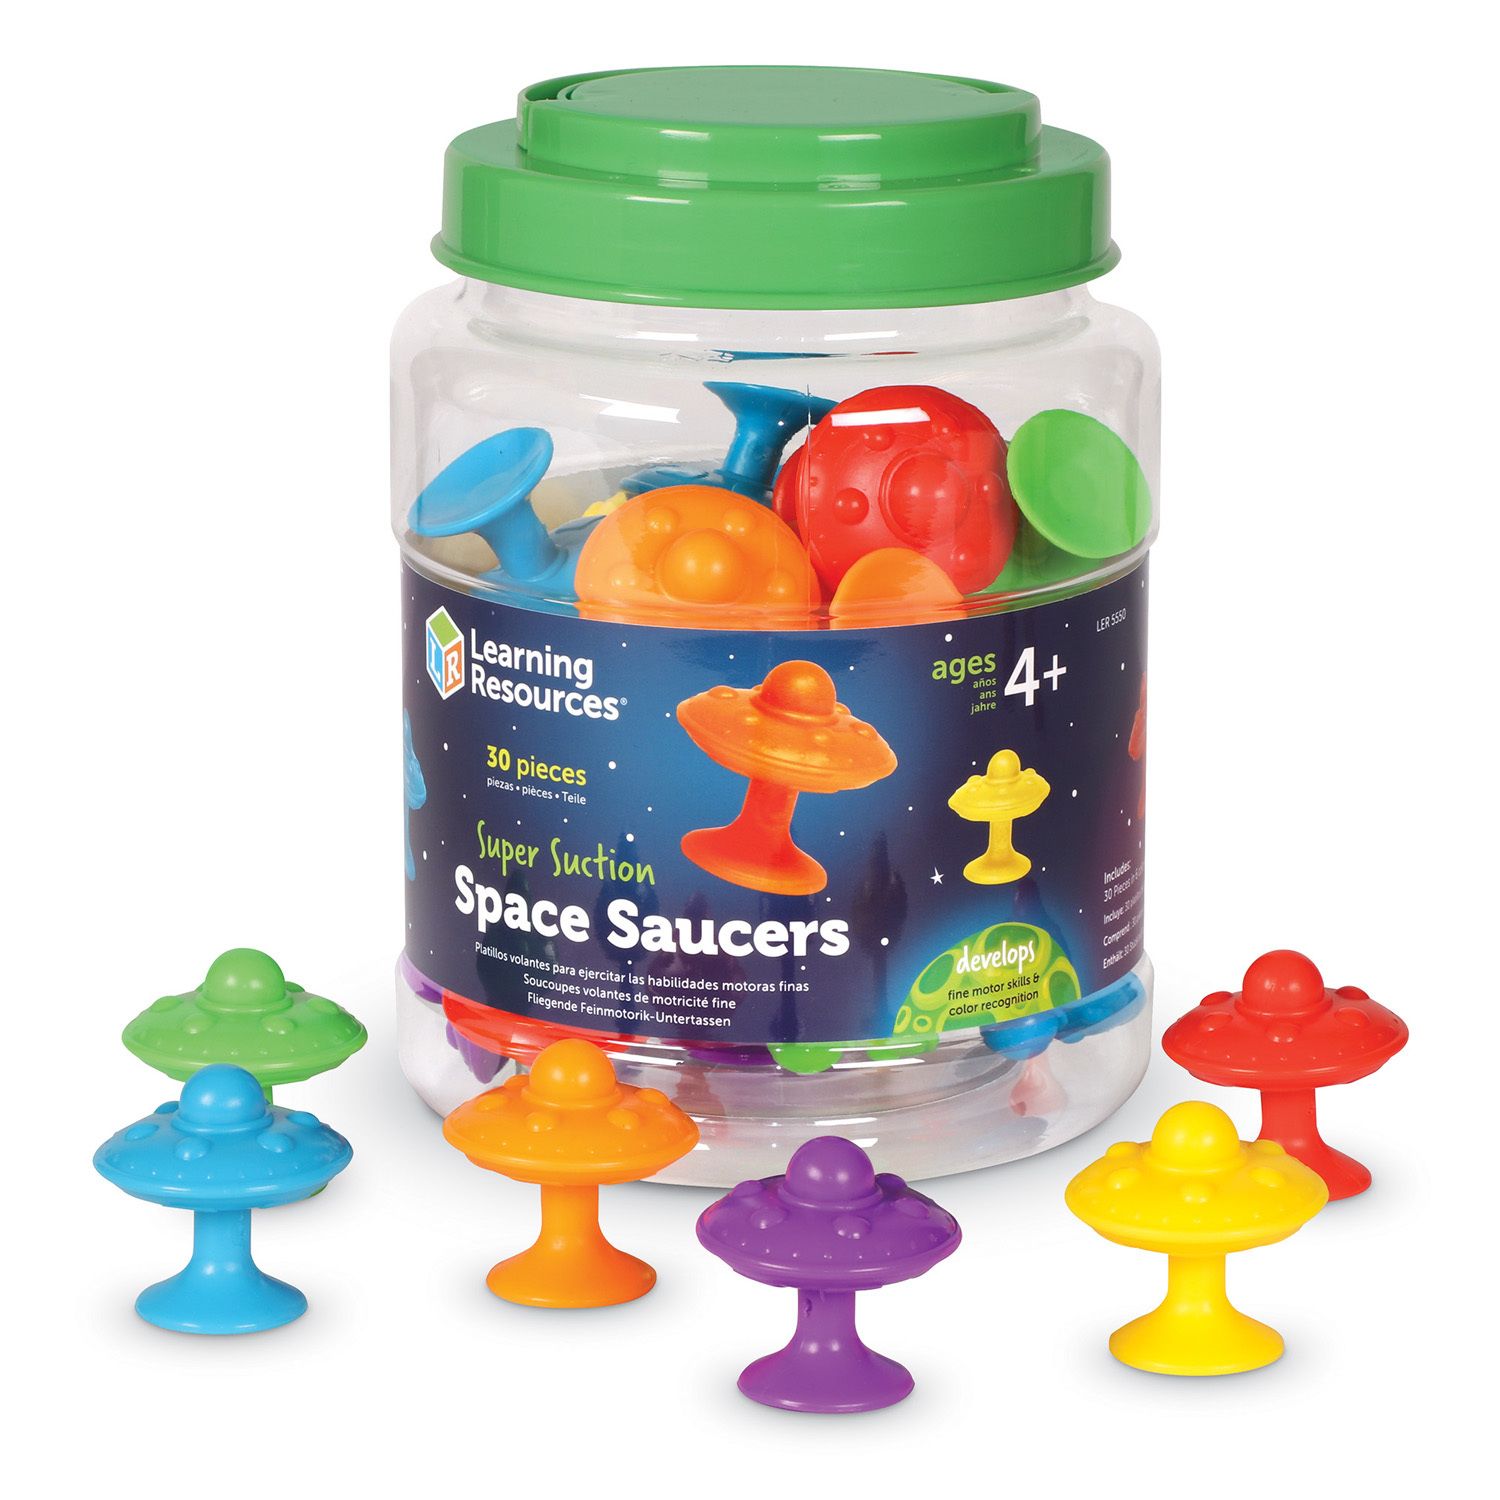 Image for Learning Resources Super Suction Space Saucers at Kohl's.